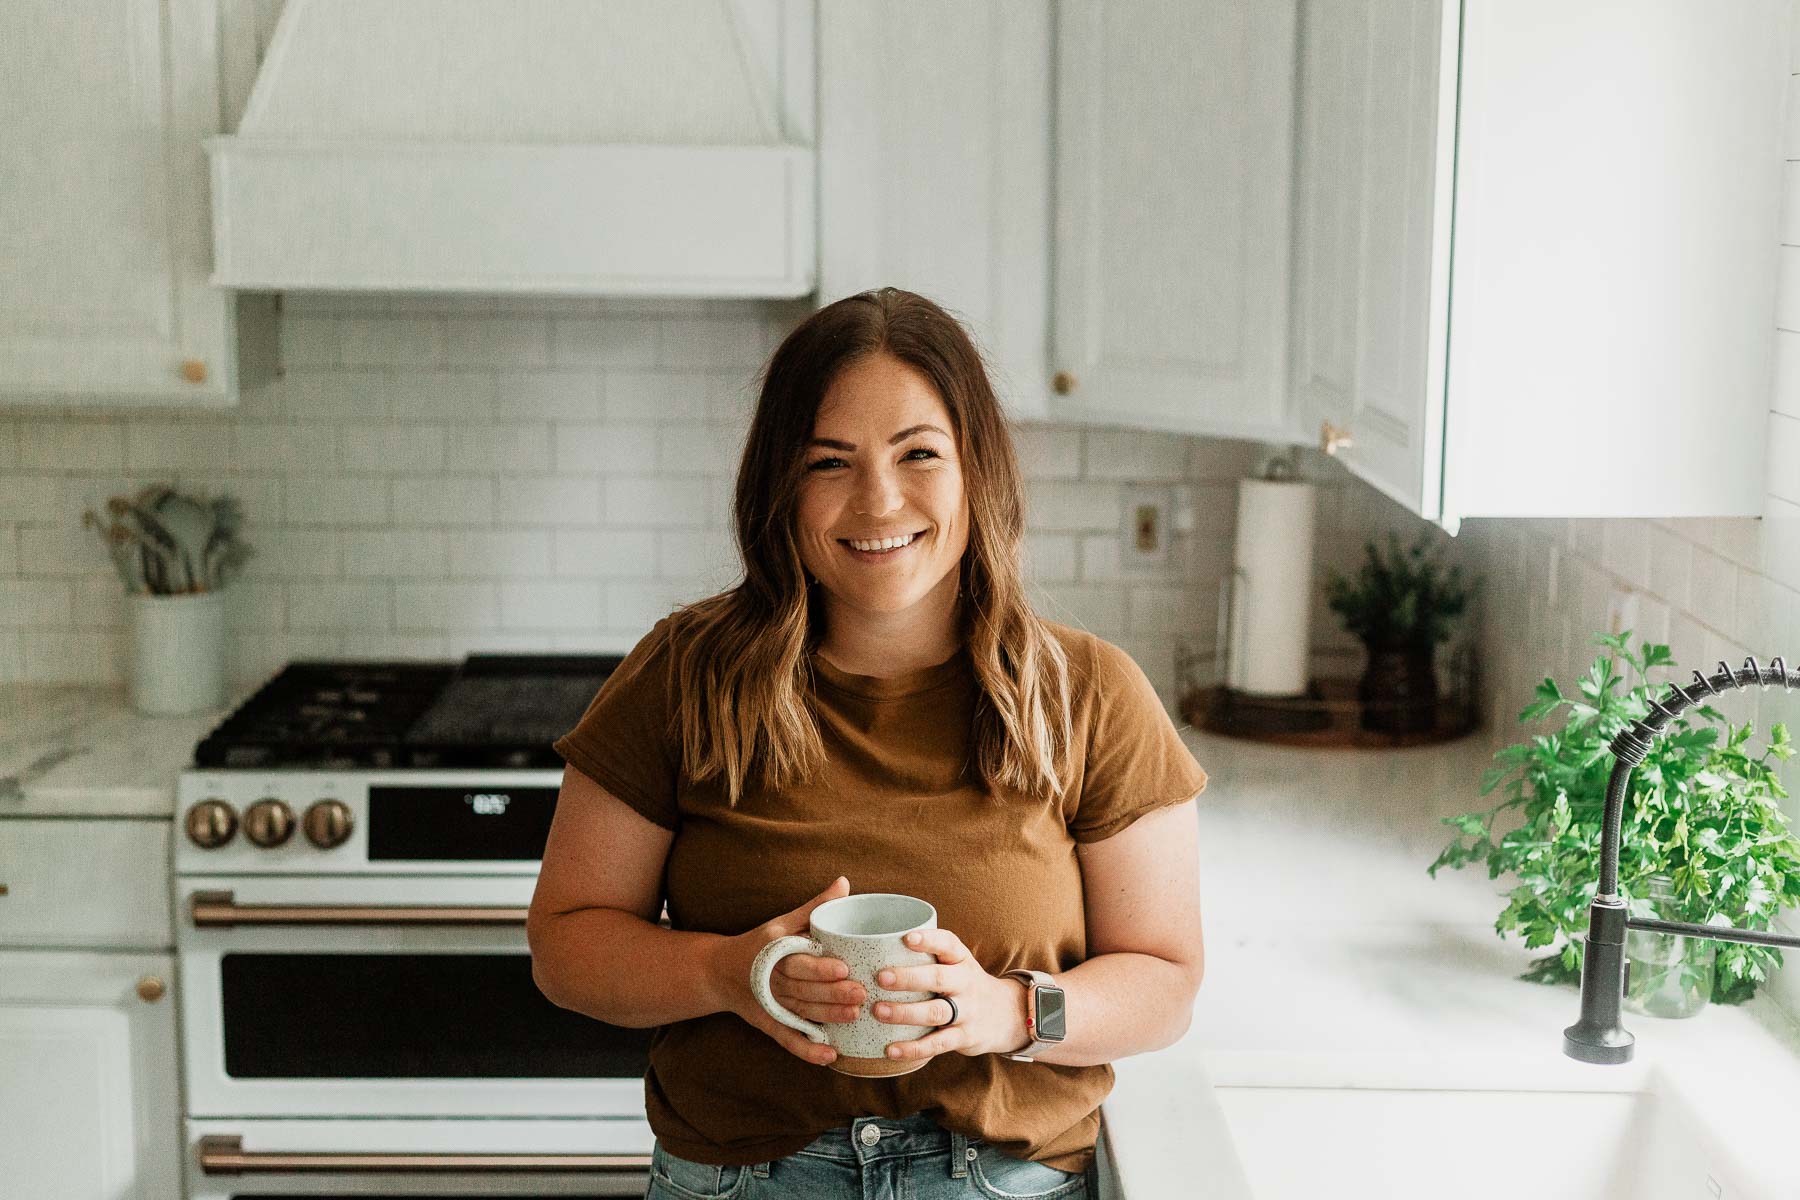 molly thompson in the kitchen with a coffee mug